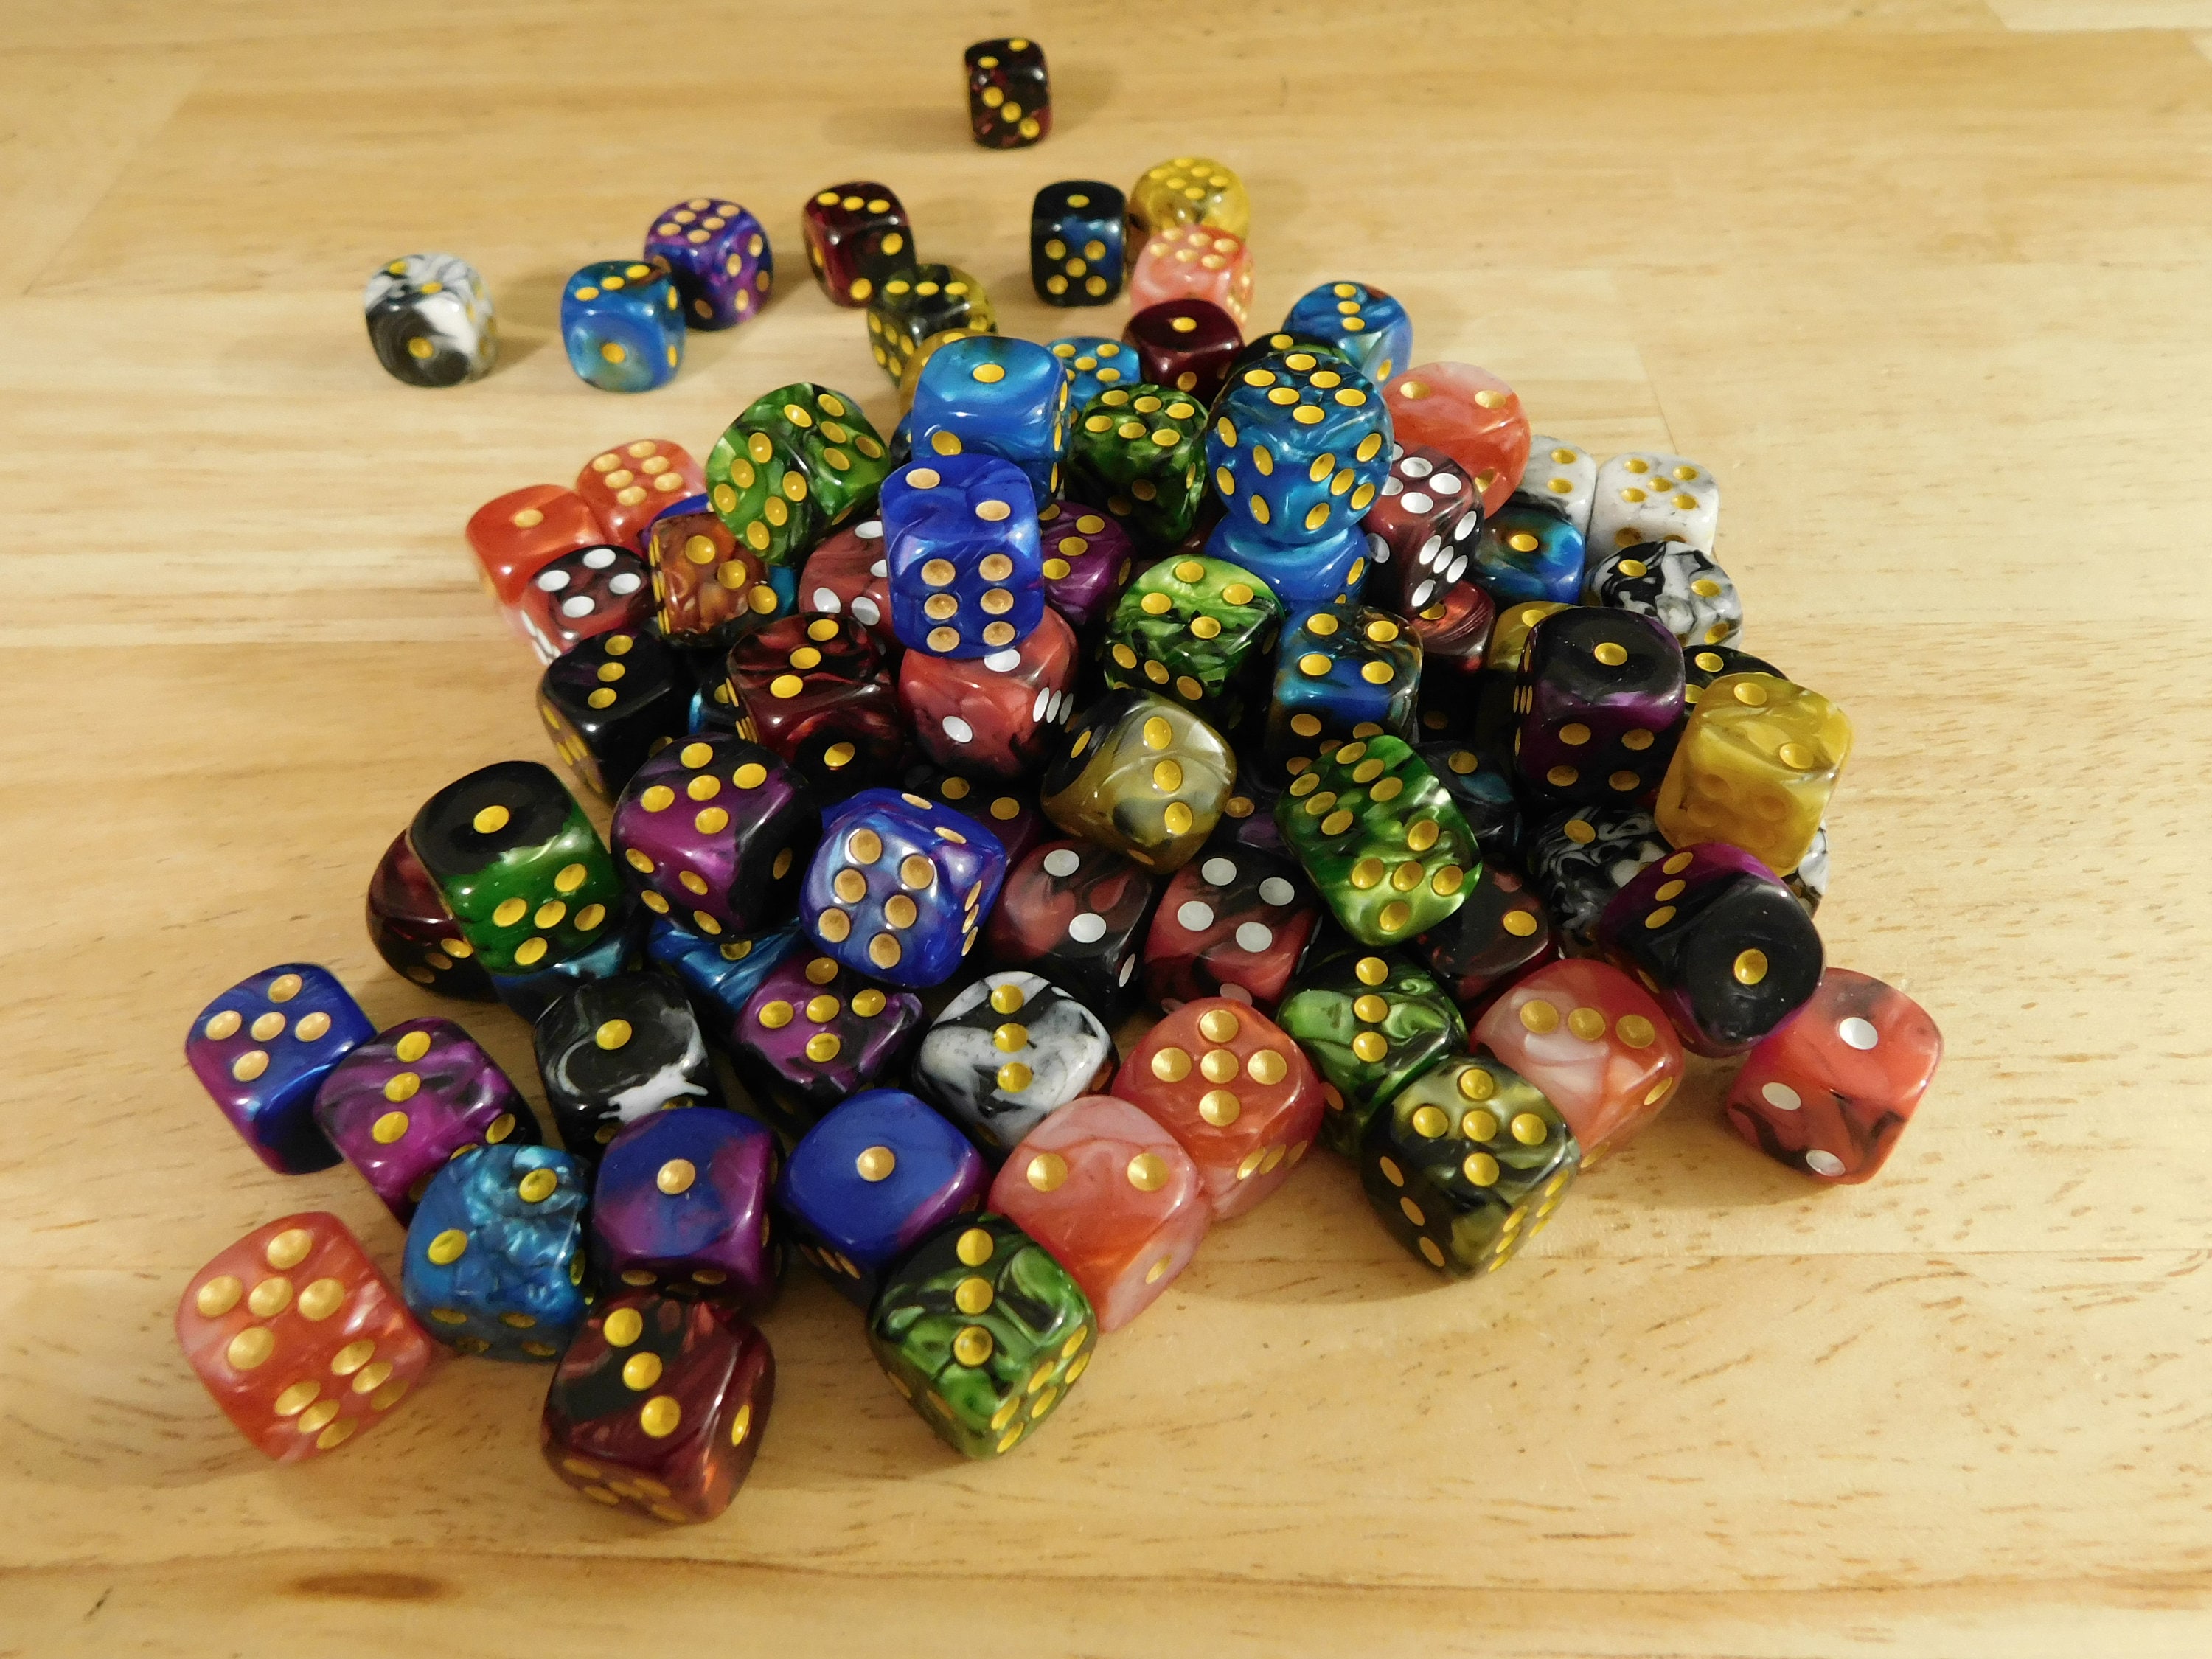 10 Beads - Colorful Lucky Dice Acrylic Dice Beads, Dice Beads, Small Dice  Beads, Plastic Dice Beads, Jewelry Making, DIY, Square Dice Beads